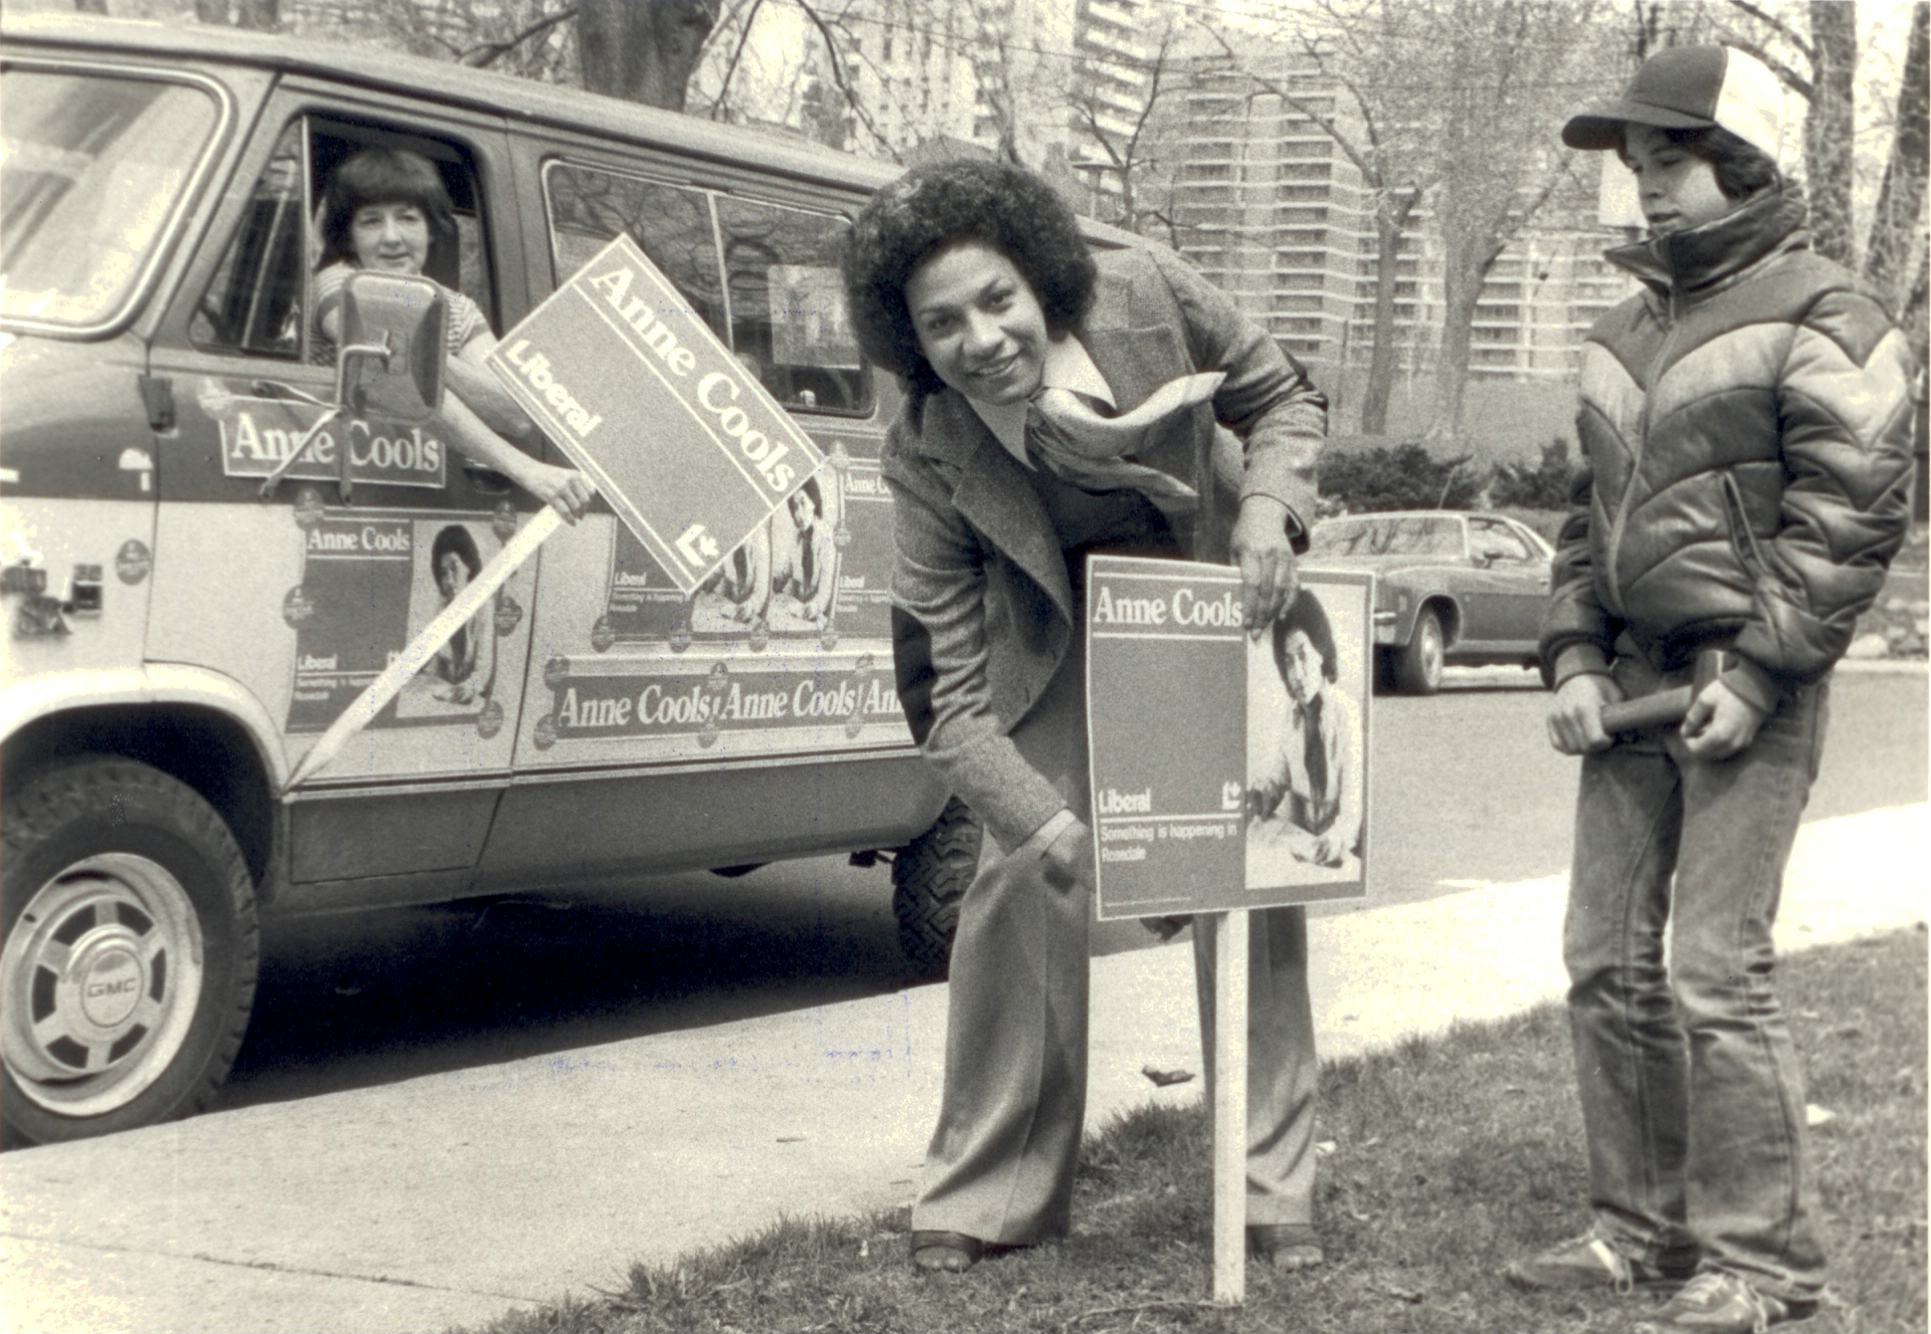 Anne Cools planting signs while on the campaign trail in 1980. Cools ran for Member of Parliament for the riding of Rosedale in Toronto.